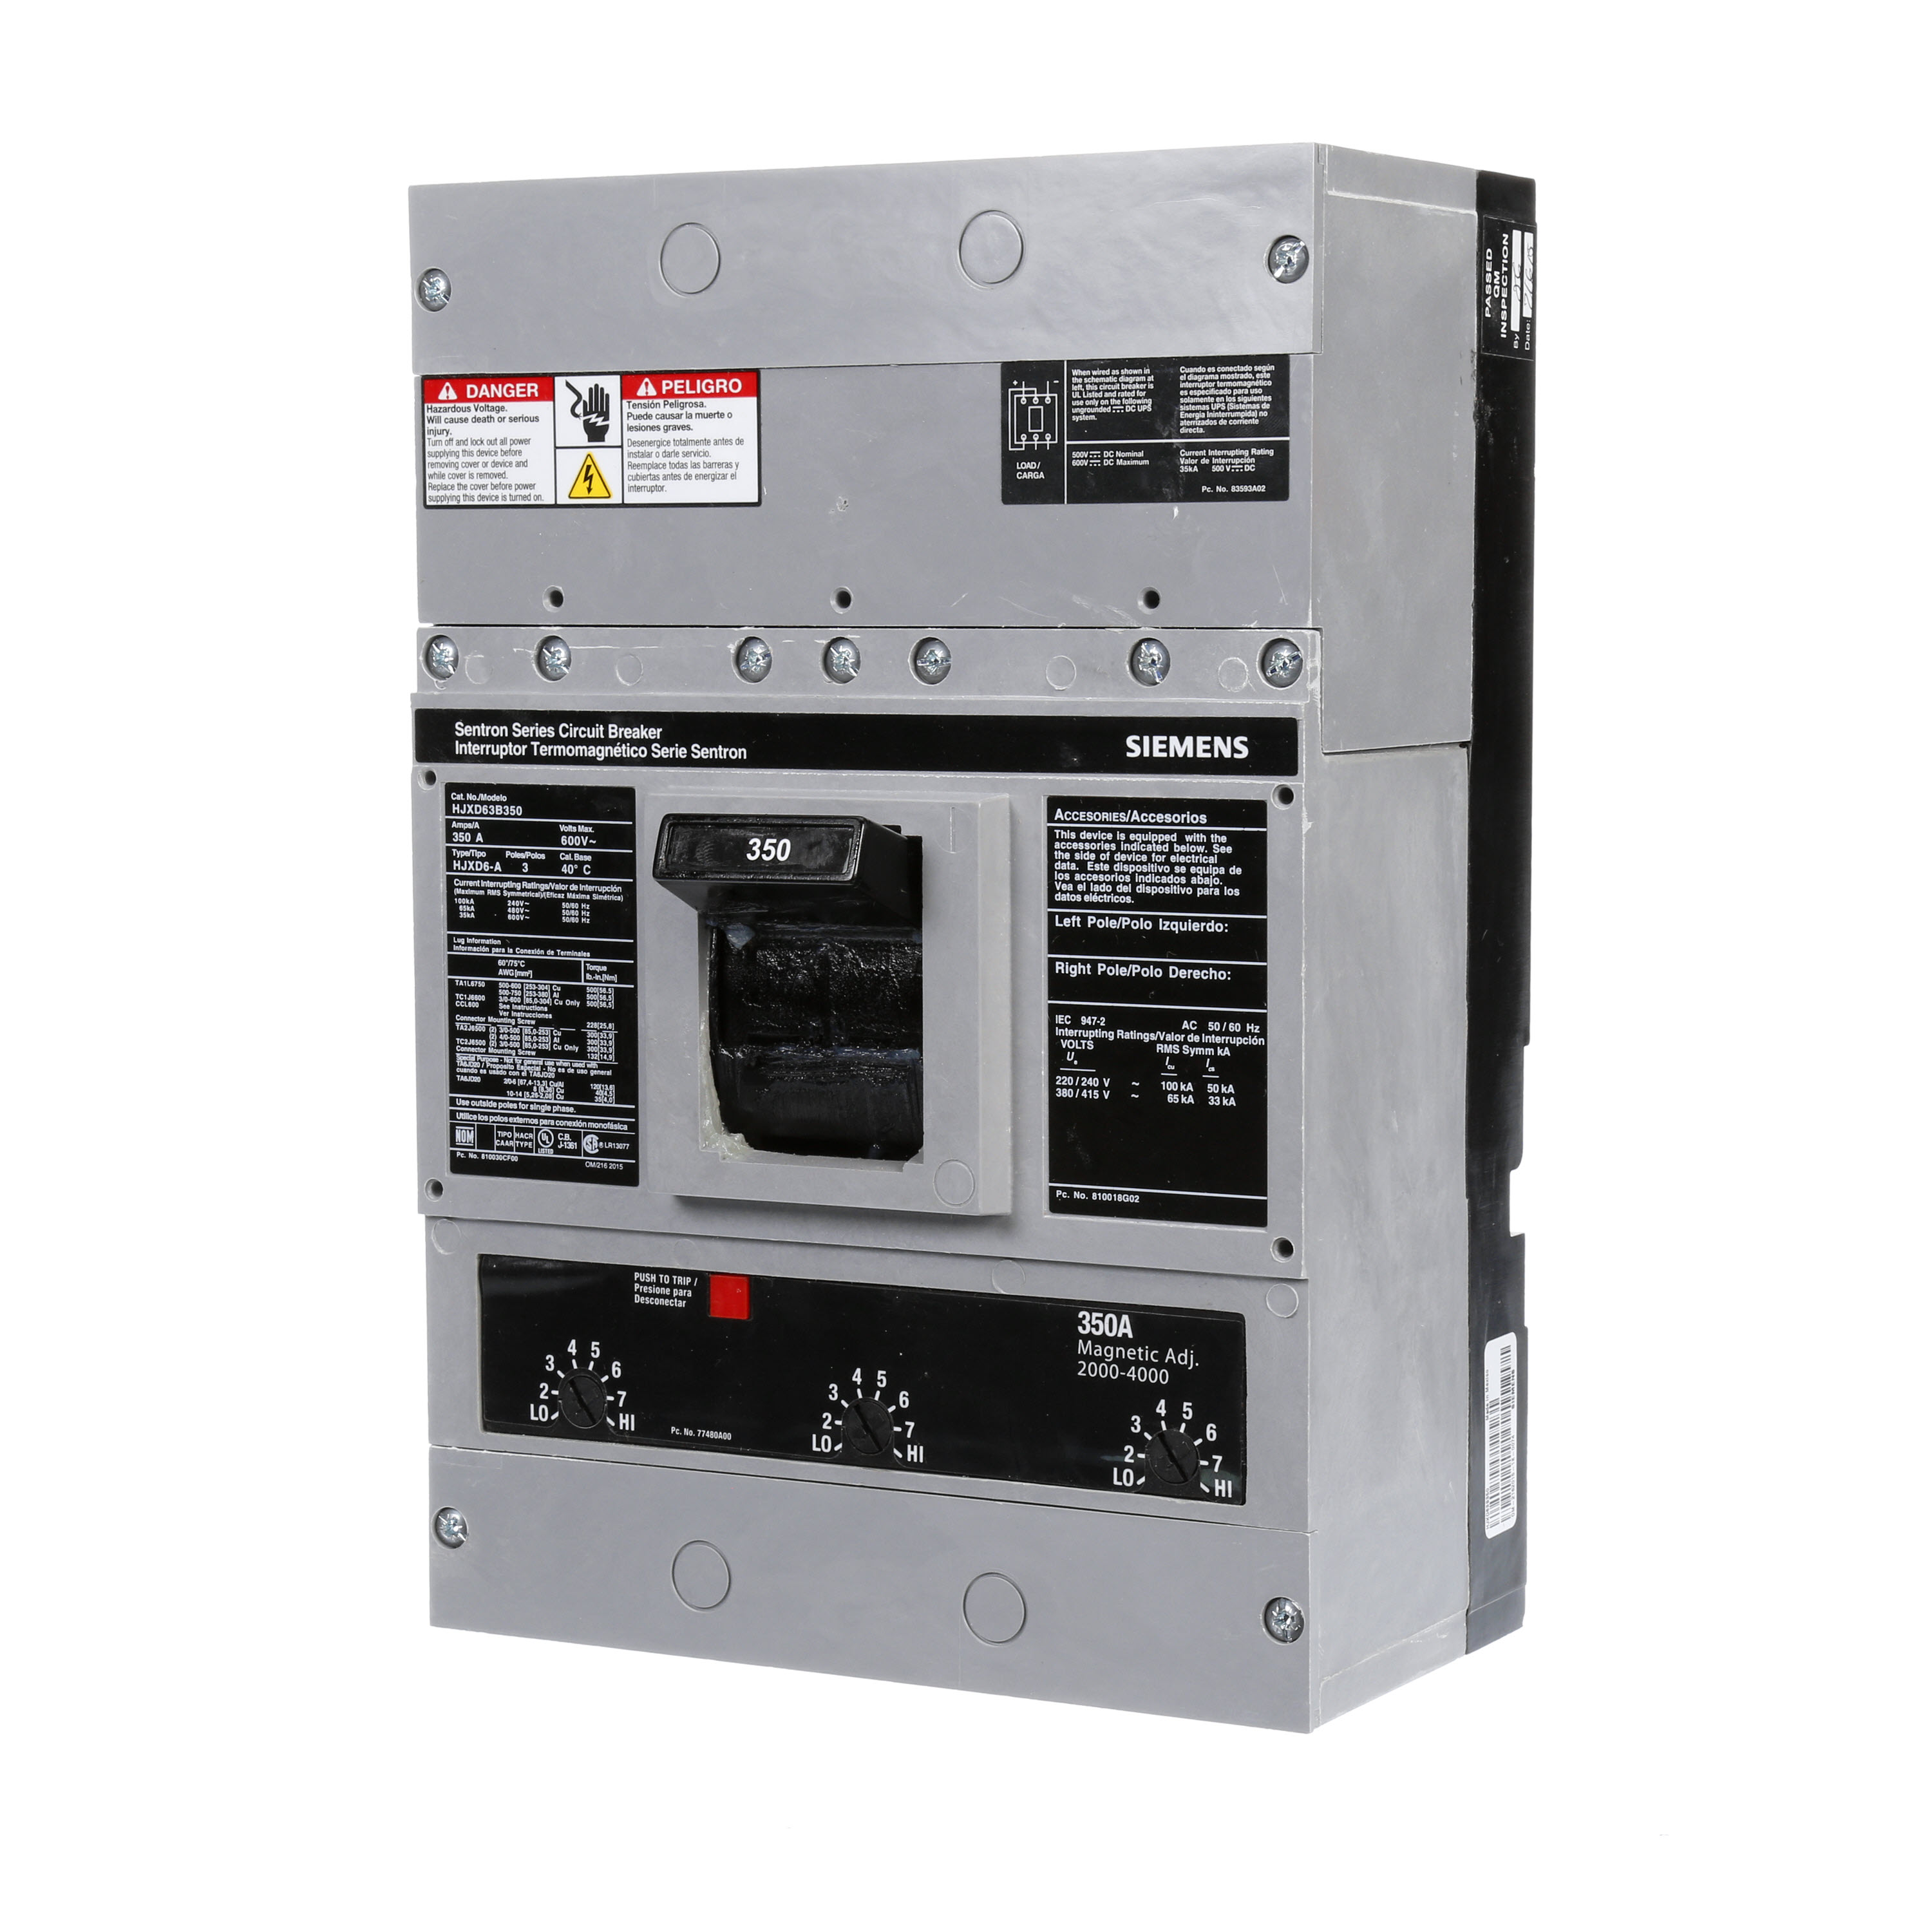 SIEMENS LOW VOLTAGE SENTRON MOLDED CASE CIRCUIT BREAKER WITH THERMAL - MAGNETICTRIP UNIT. ASSEMBLED STANDARD 40 DEG C BREAKER JD FRAME WITH HIGH BREAKING CAPACITY. 350A 3-POLE (35KAIC AT 600V) (65KAIC AT 480V). NON-INTERCHANGEABLE TRIP UNIT. SPECIAL FEATURES NO LUGS INSTALLED. DIMENSIONS (W x H x D) IN 7.50 x 11.0 x 4.00.